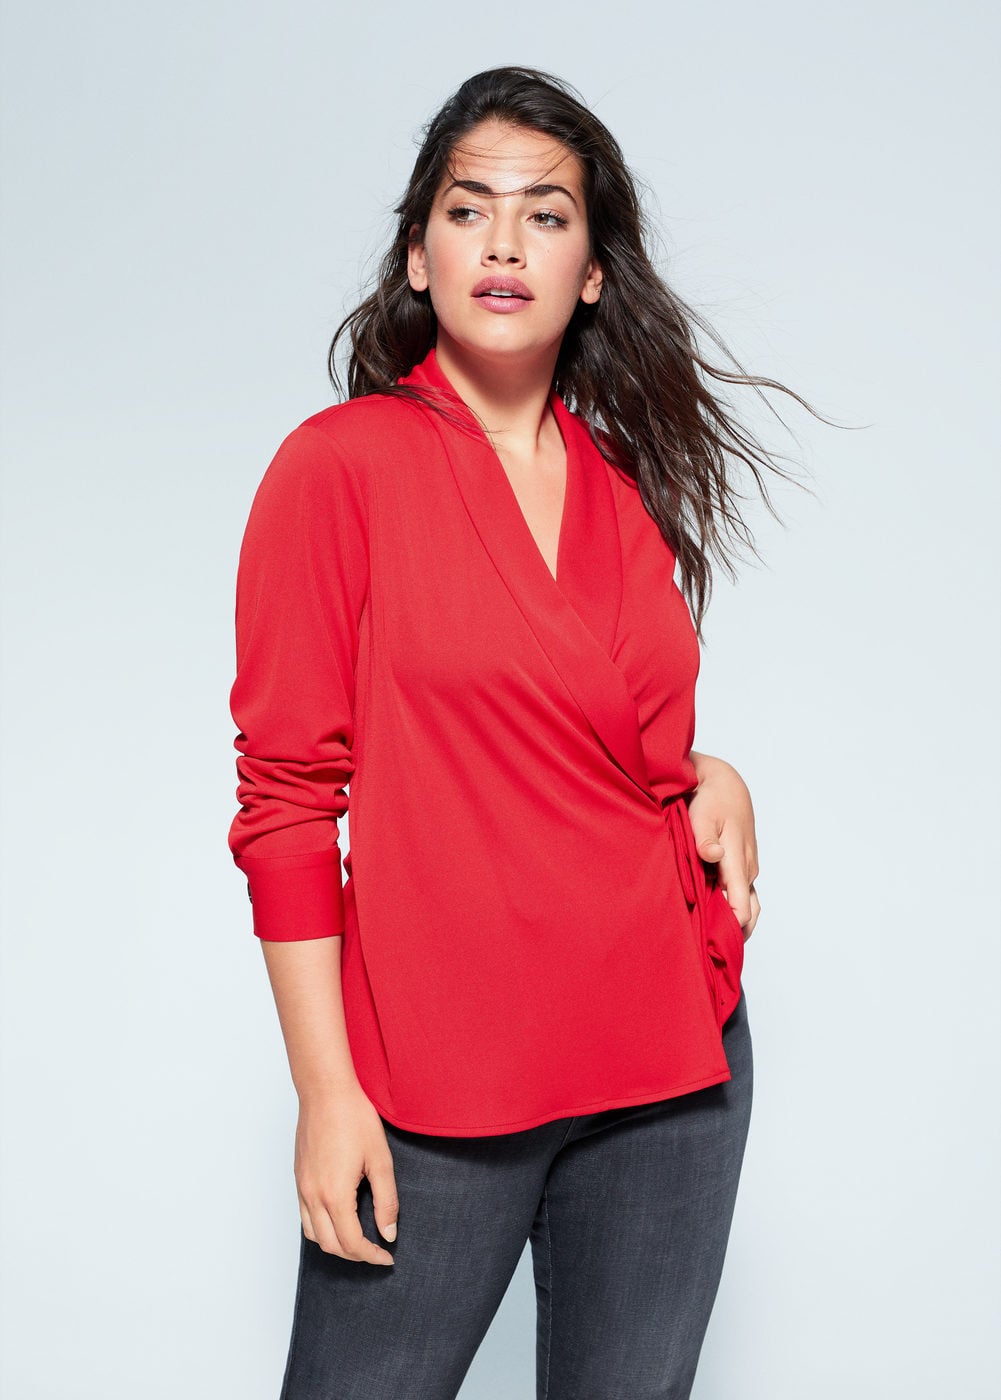 planer Joseph Banks Grine Violeta by Mango Plus Size Wrap Bow T-Shirt | For Spring 2020, Color Trends  Are Bold, Bright, and a Total *Mood* | POPSUGAR Fashion Photo 25